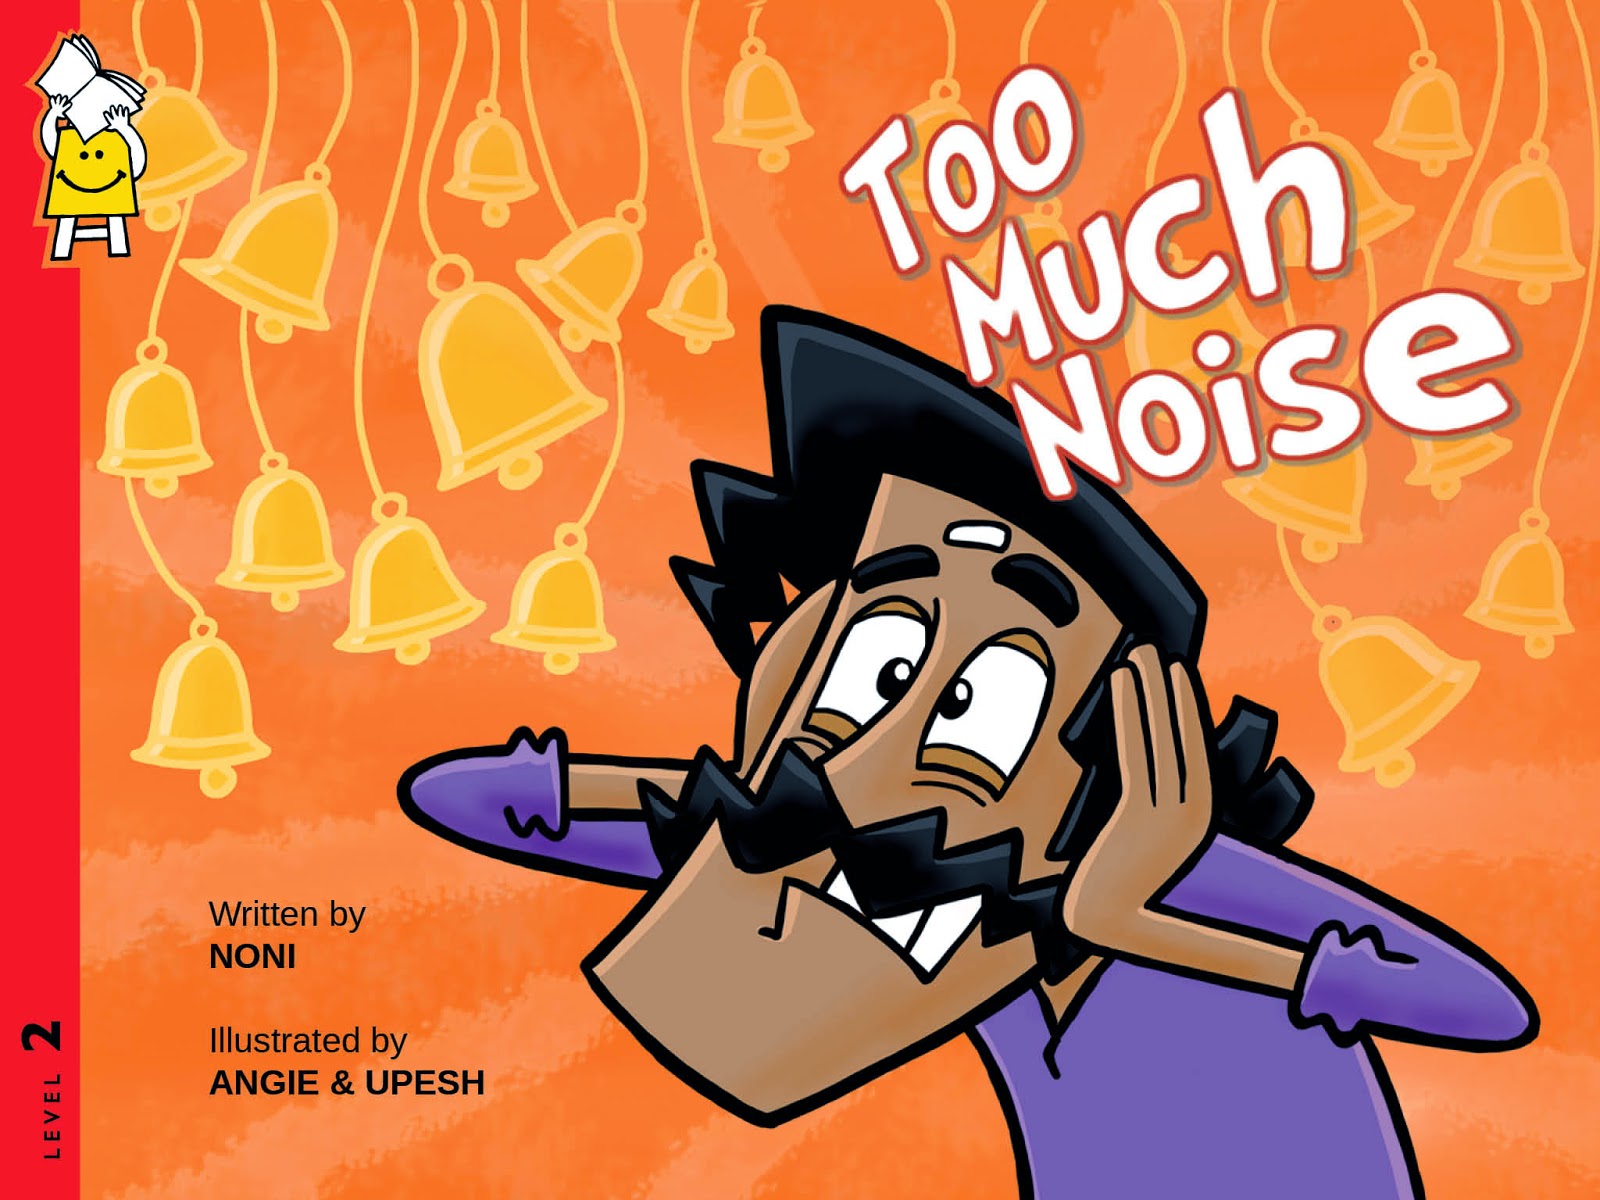 review of book noise